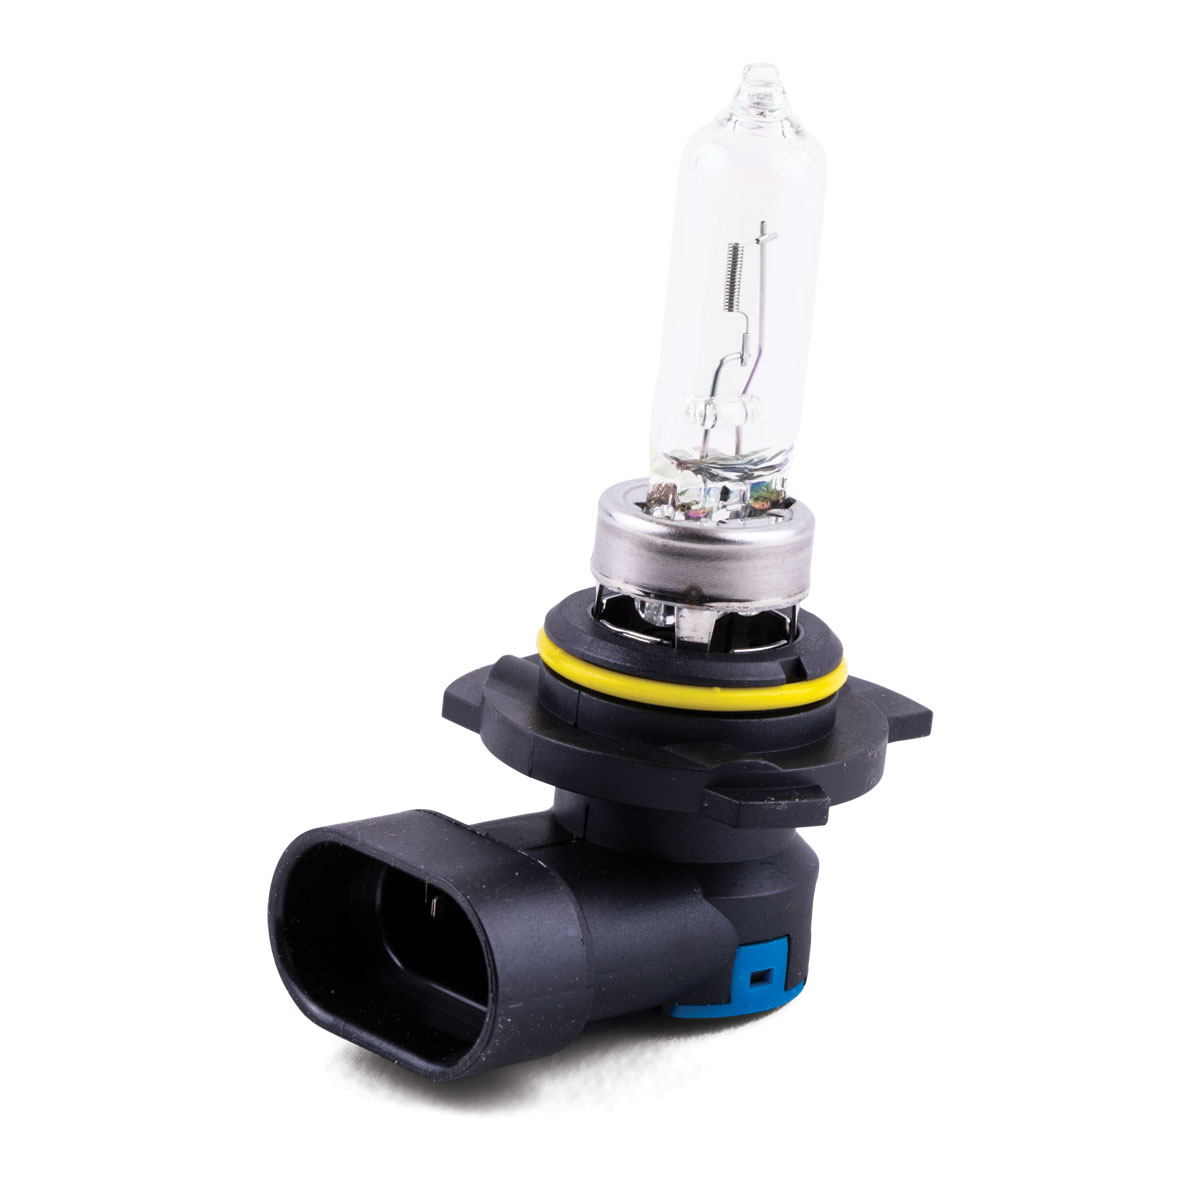 H9012LL Halogen Headlamp Capsule - Kimball Midwest